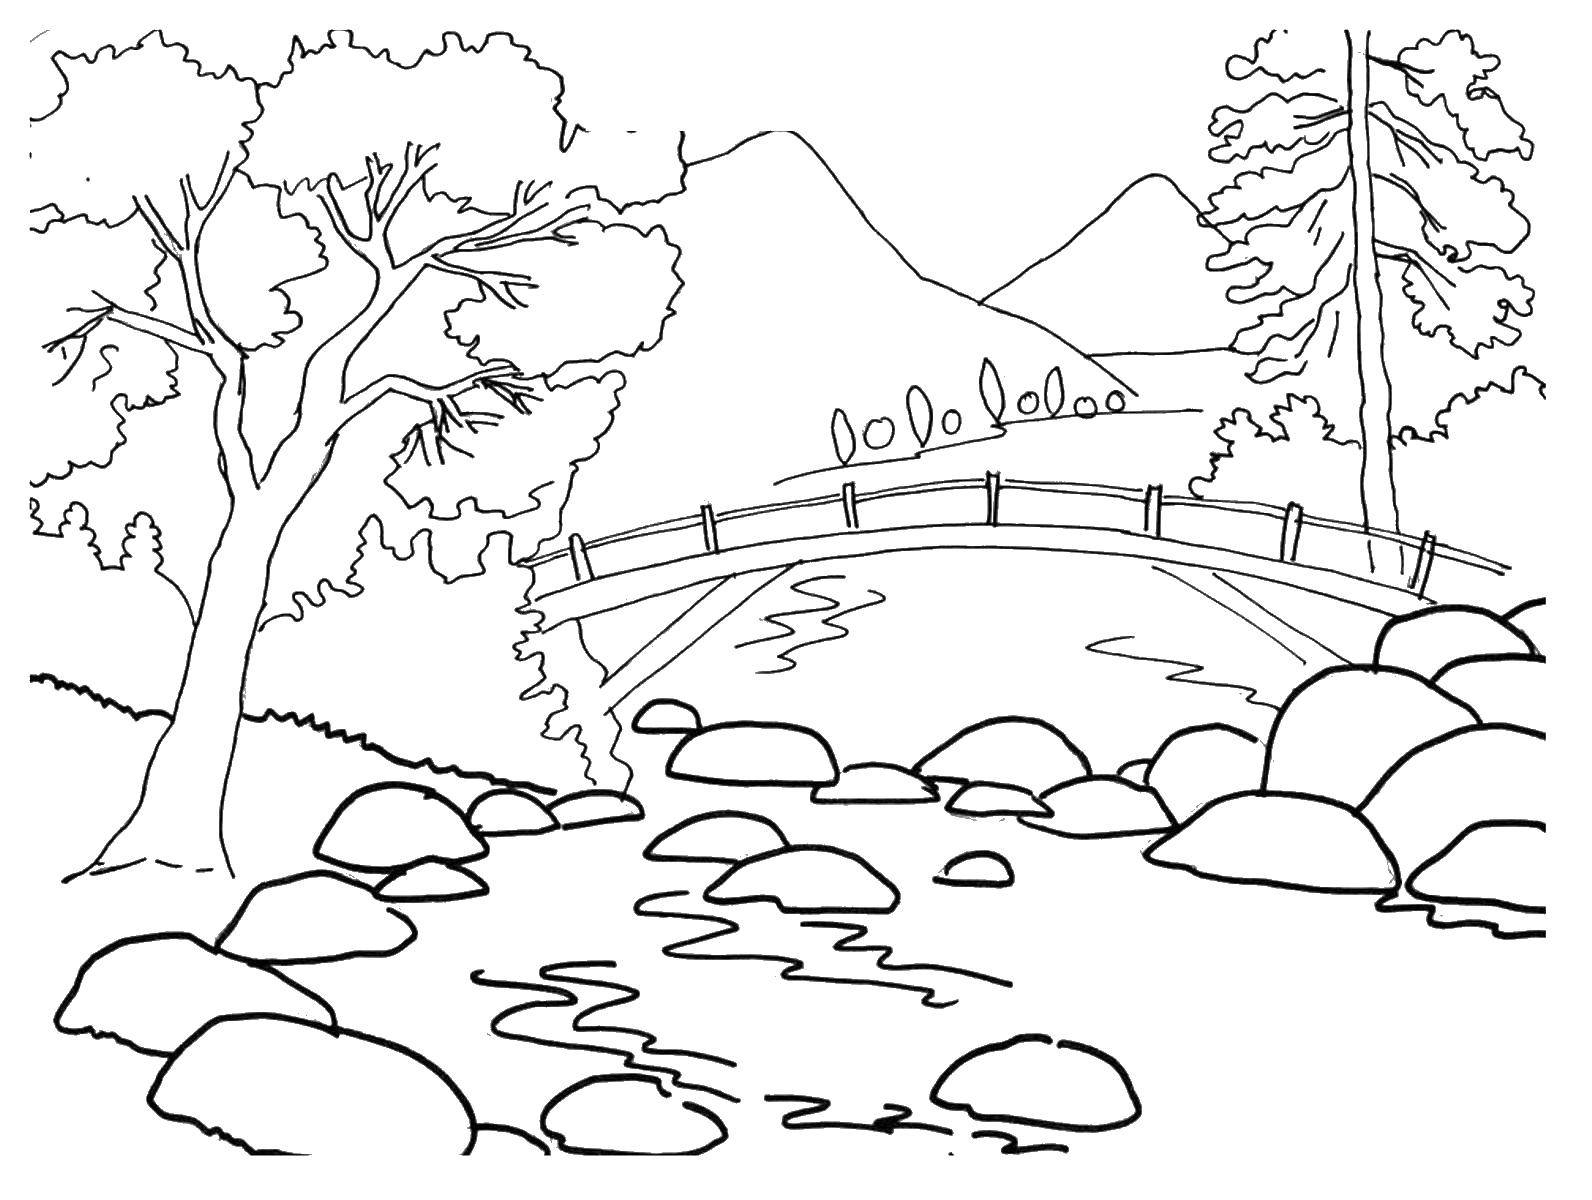 Coloring The bridge over the river and the tree. Category Nature. Tags:  bridge, tree, river.